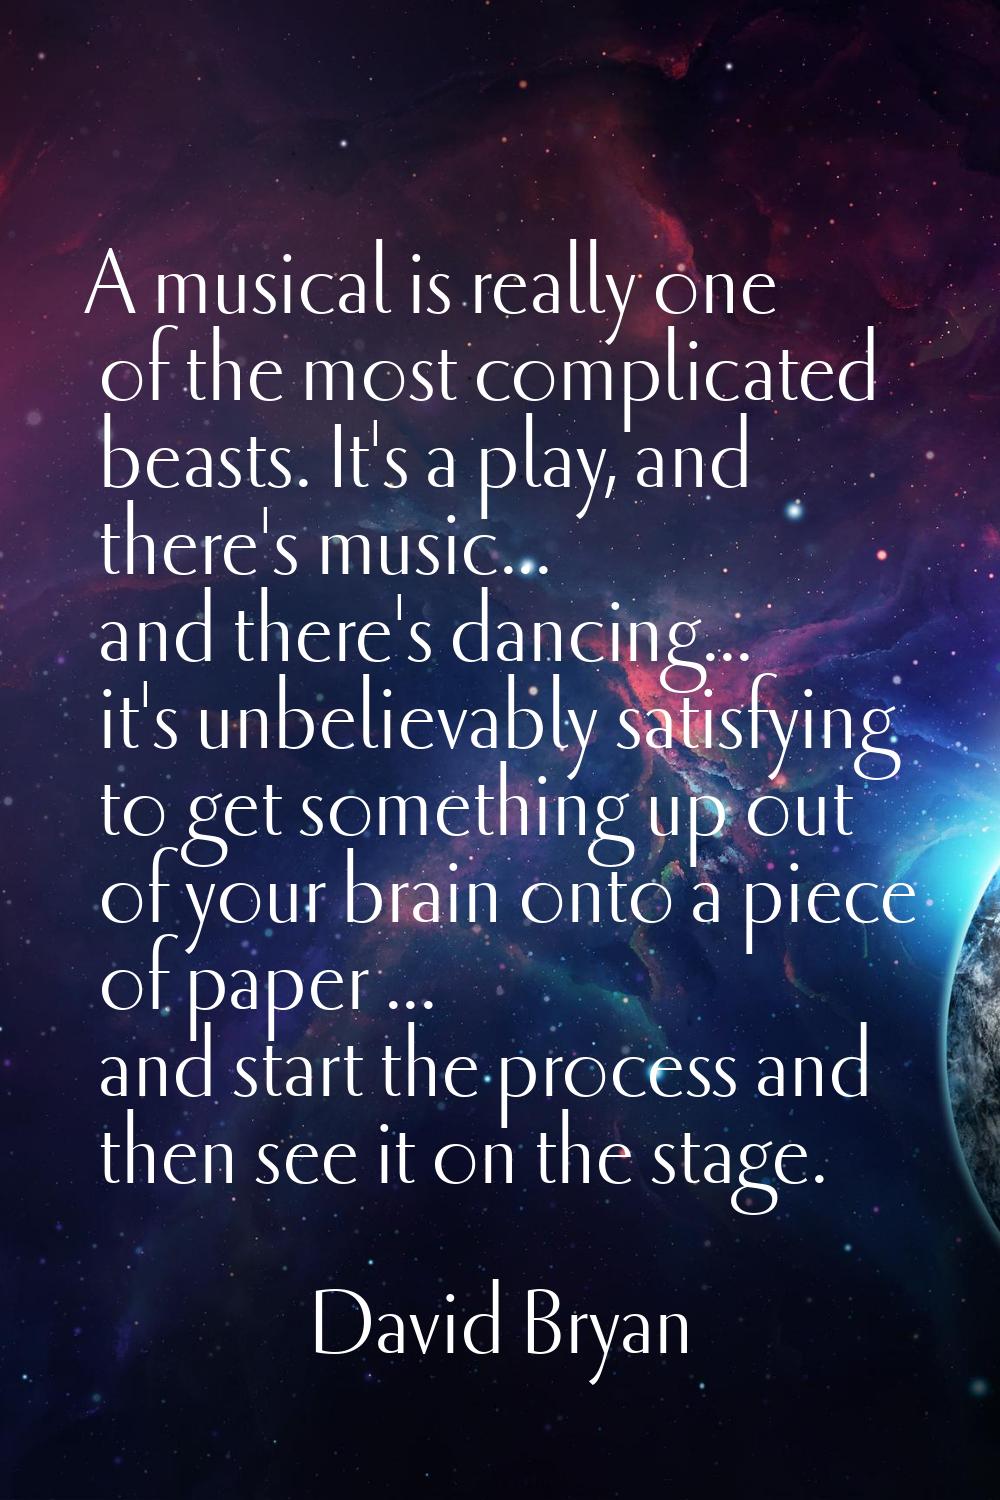 A musical is really one of the most complicated beasts. It's a play, and there's music... and there